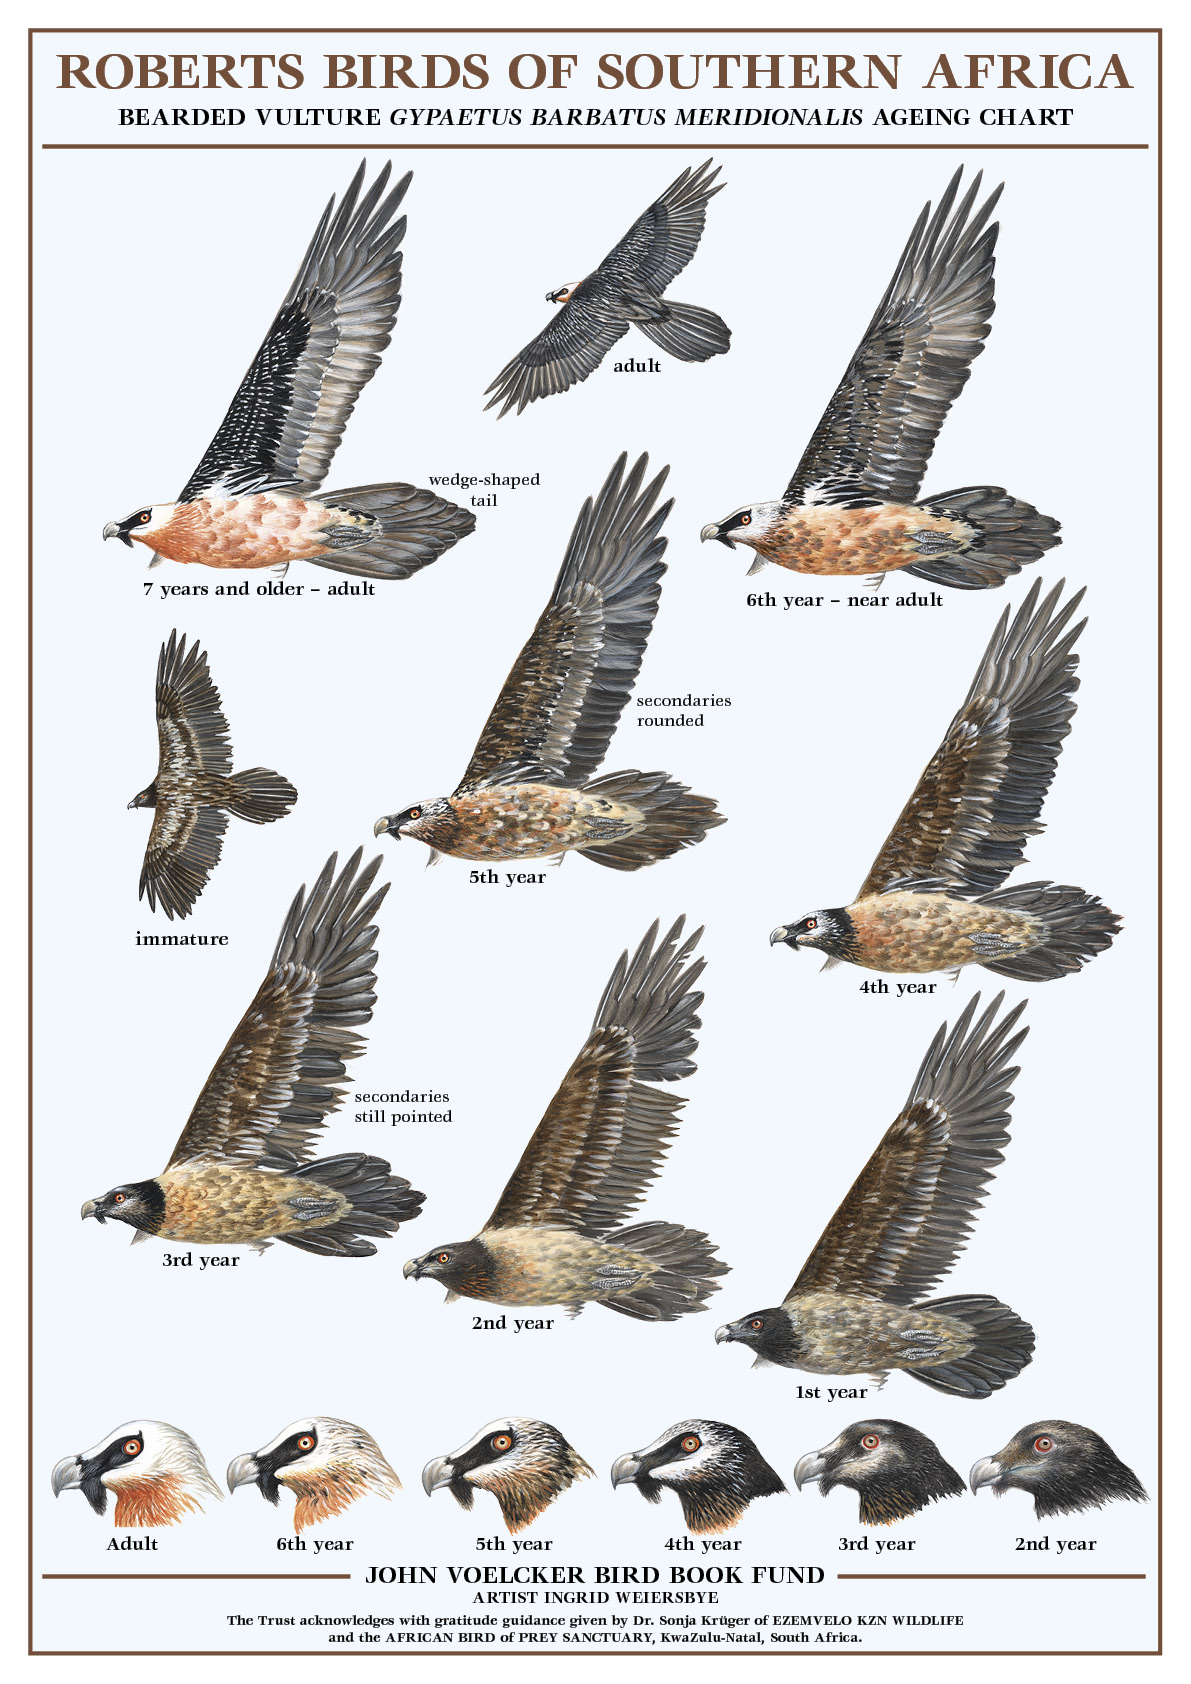 Bearded Vulture Aging Chart